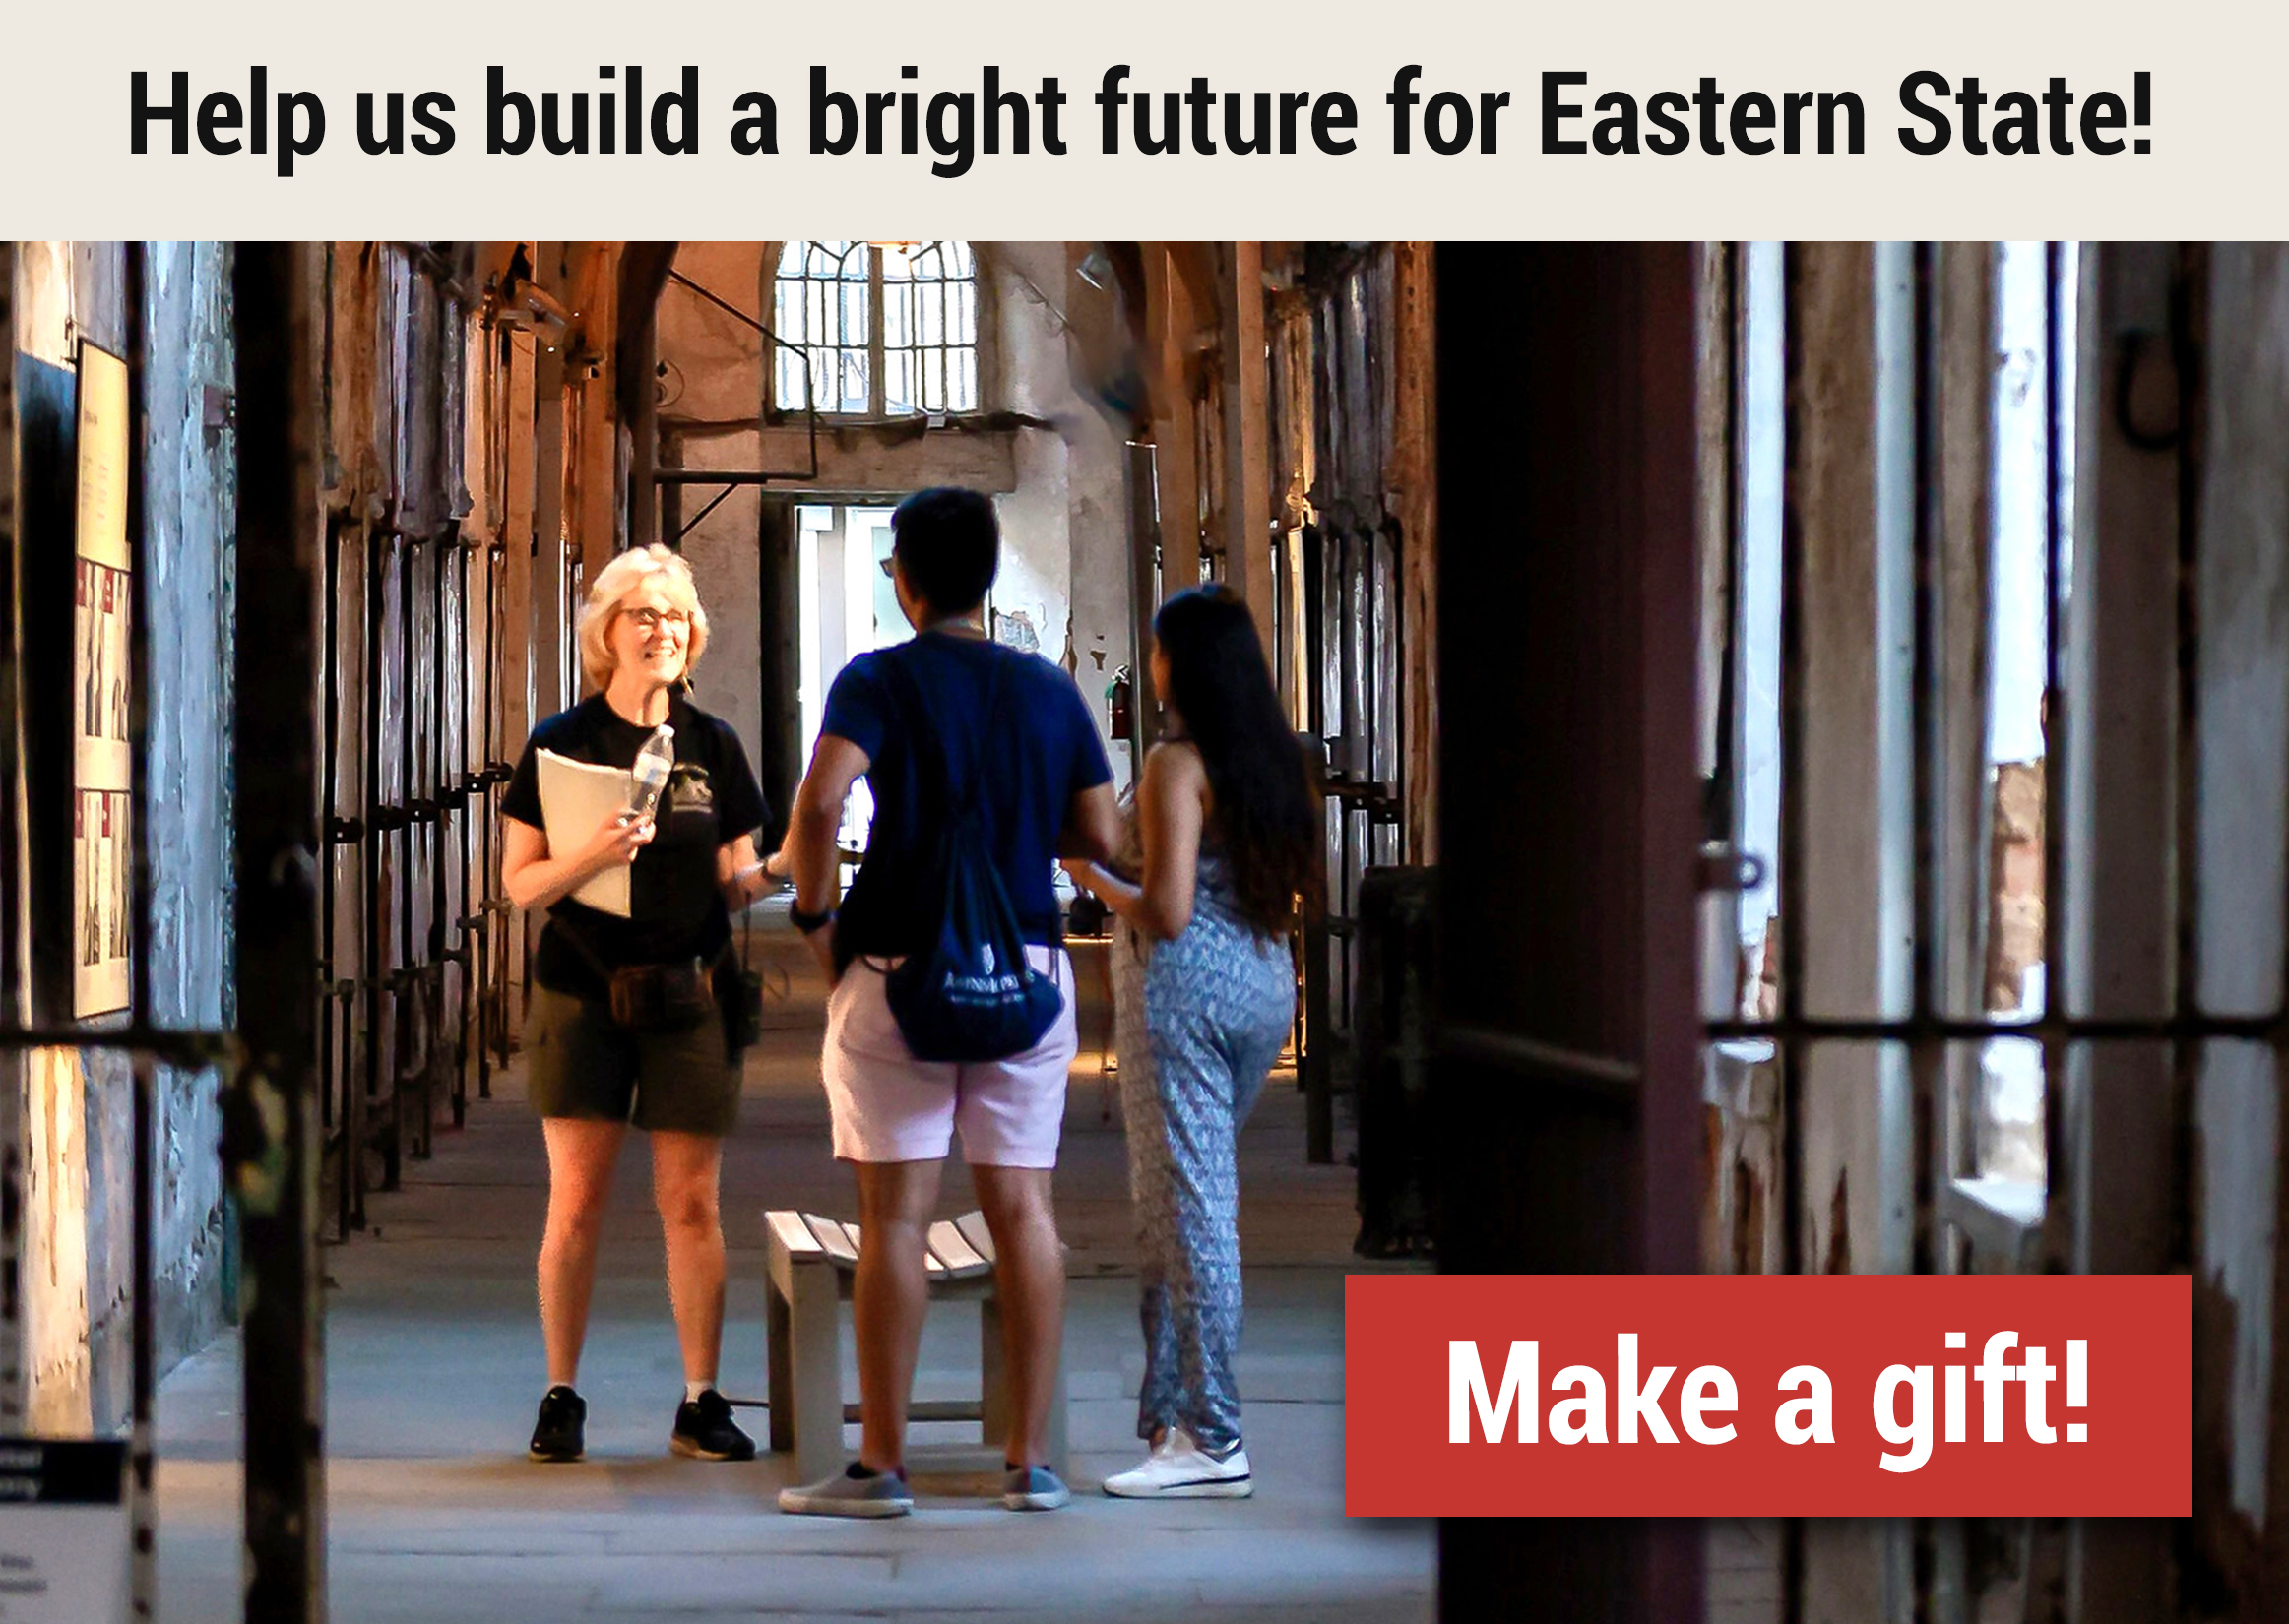 Help us build a bright future. Make a gift today!